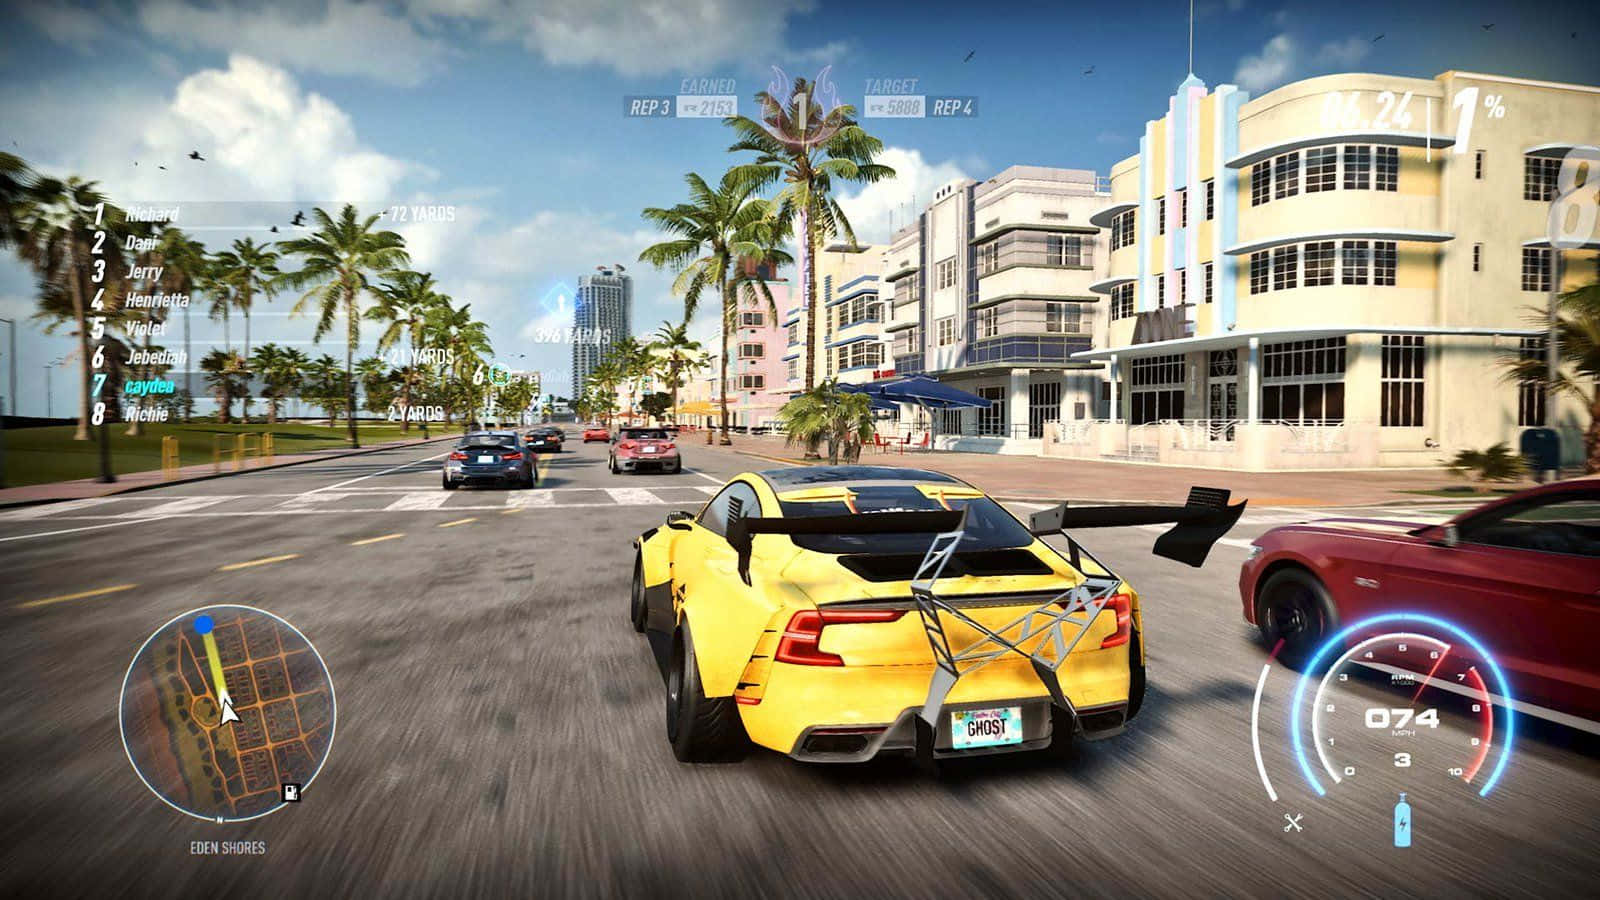 A Screenshot Of A Racing Game With Cars Driving Down The Street